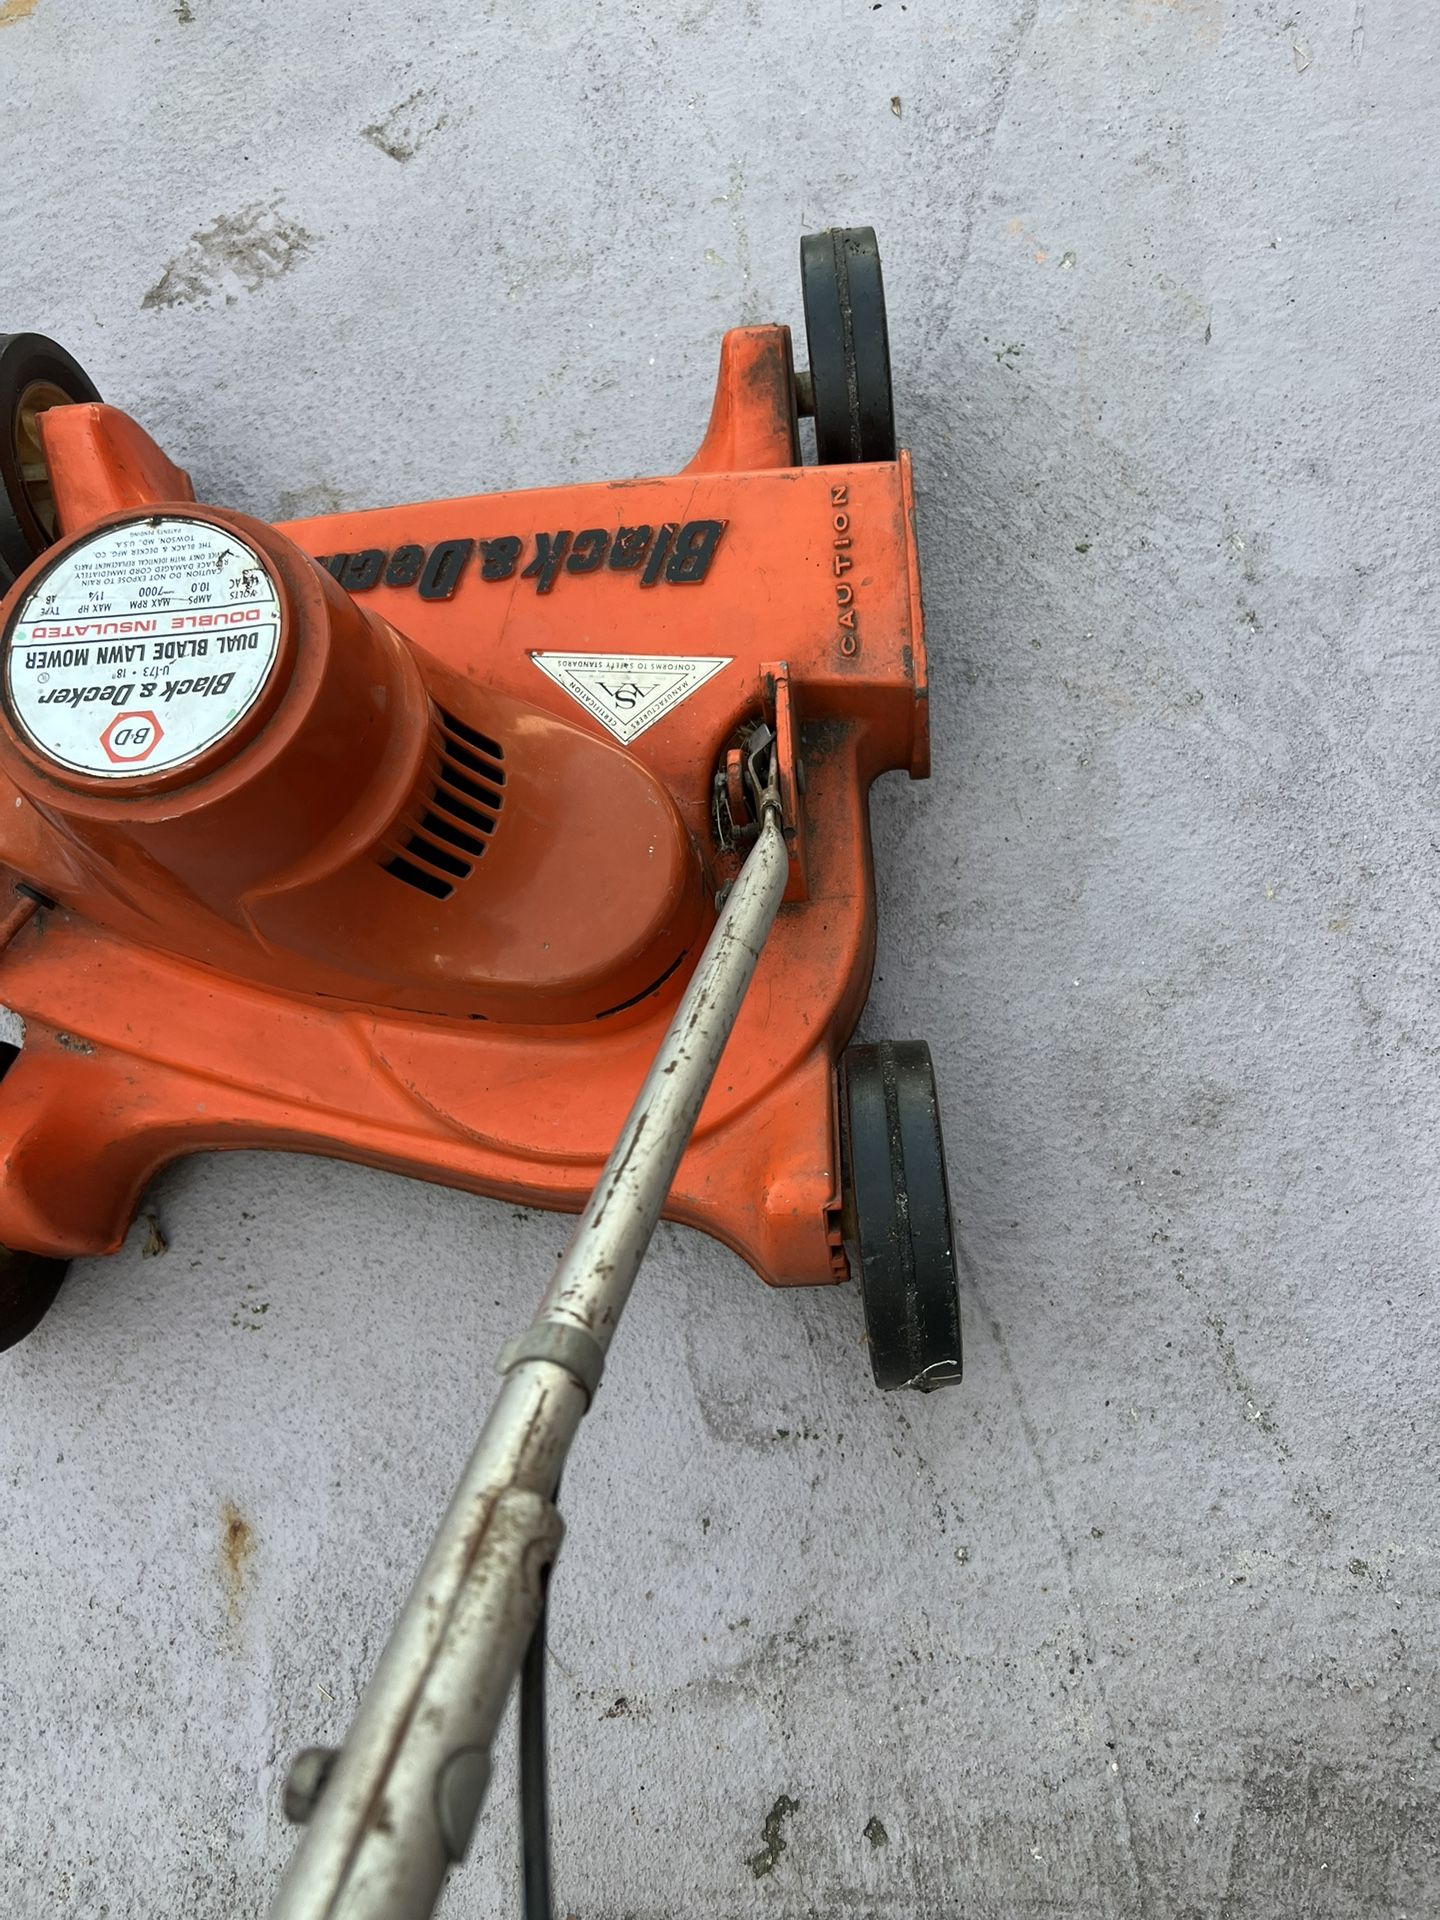 Black & Decker 3.5 HP Electric Lawnmower for Sale in Navarre, OH - OfferUp